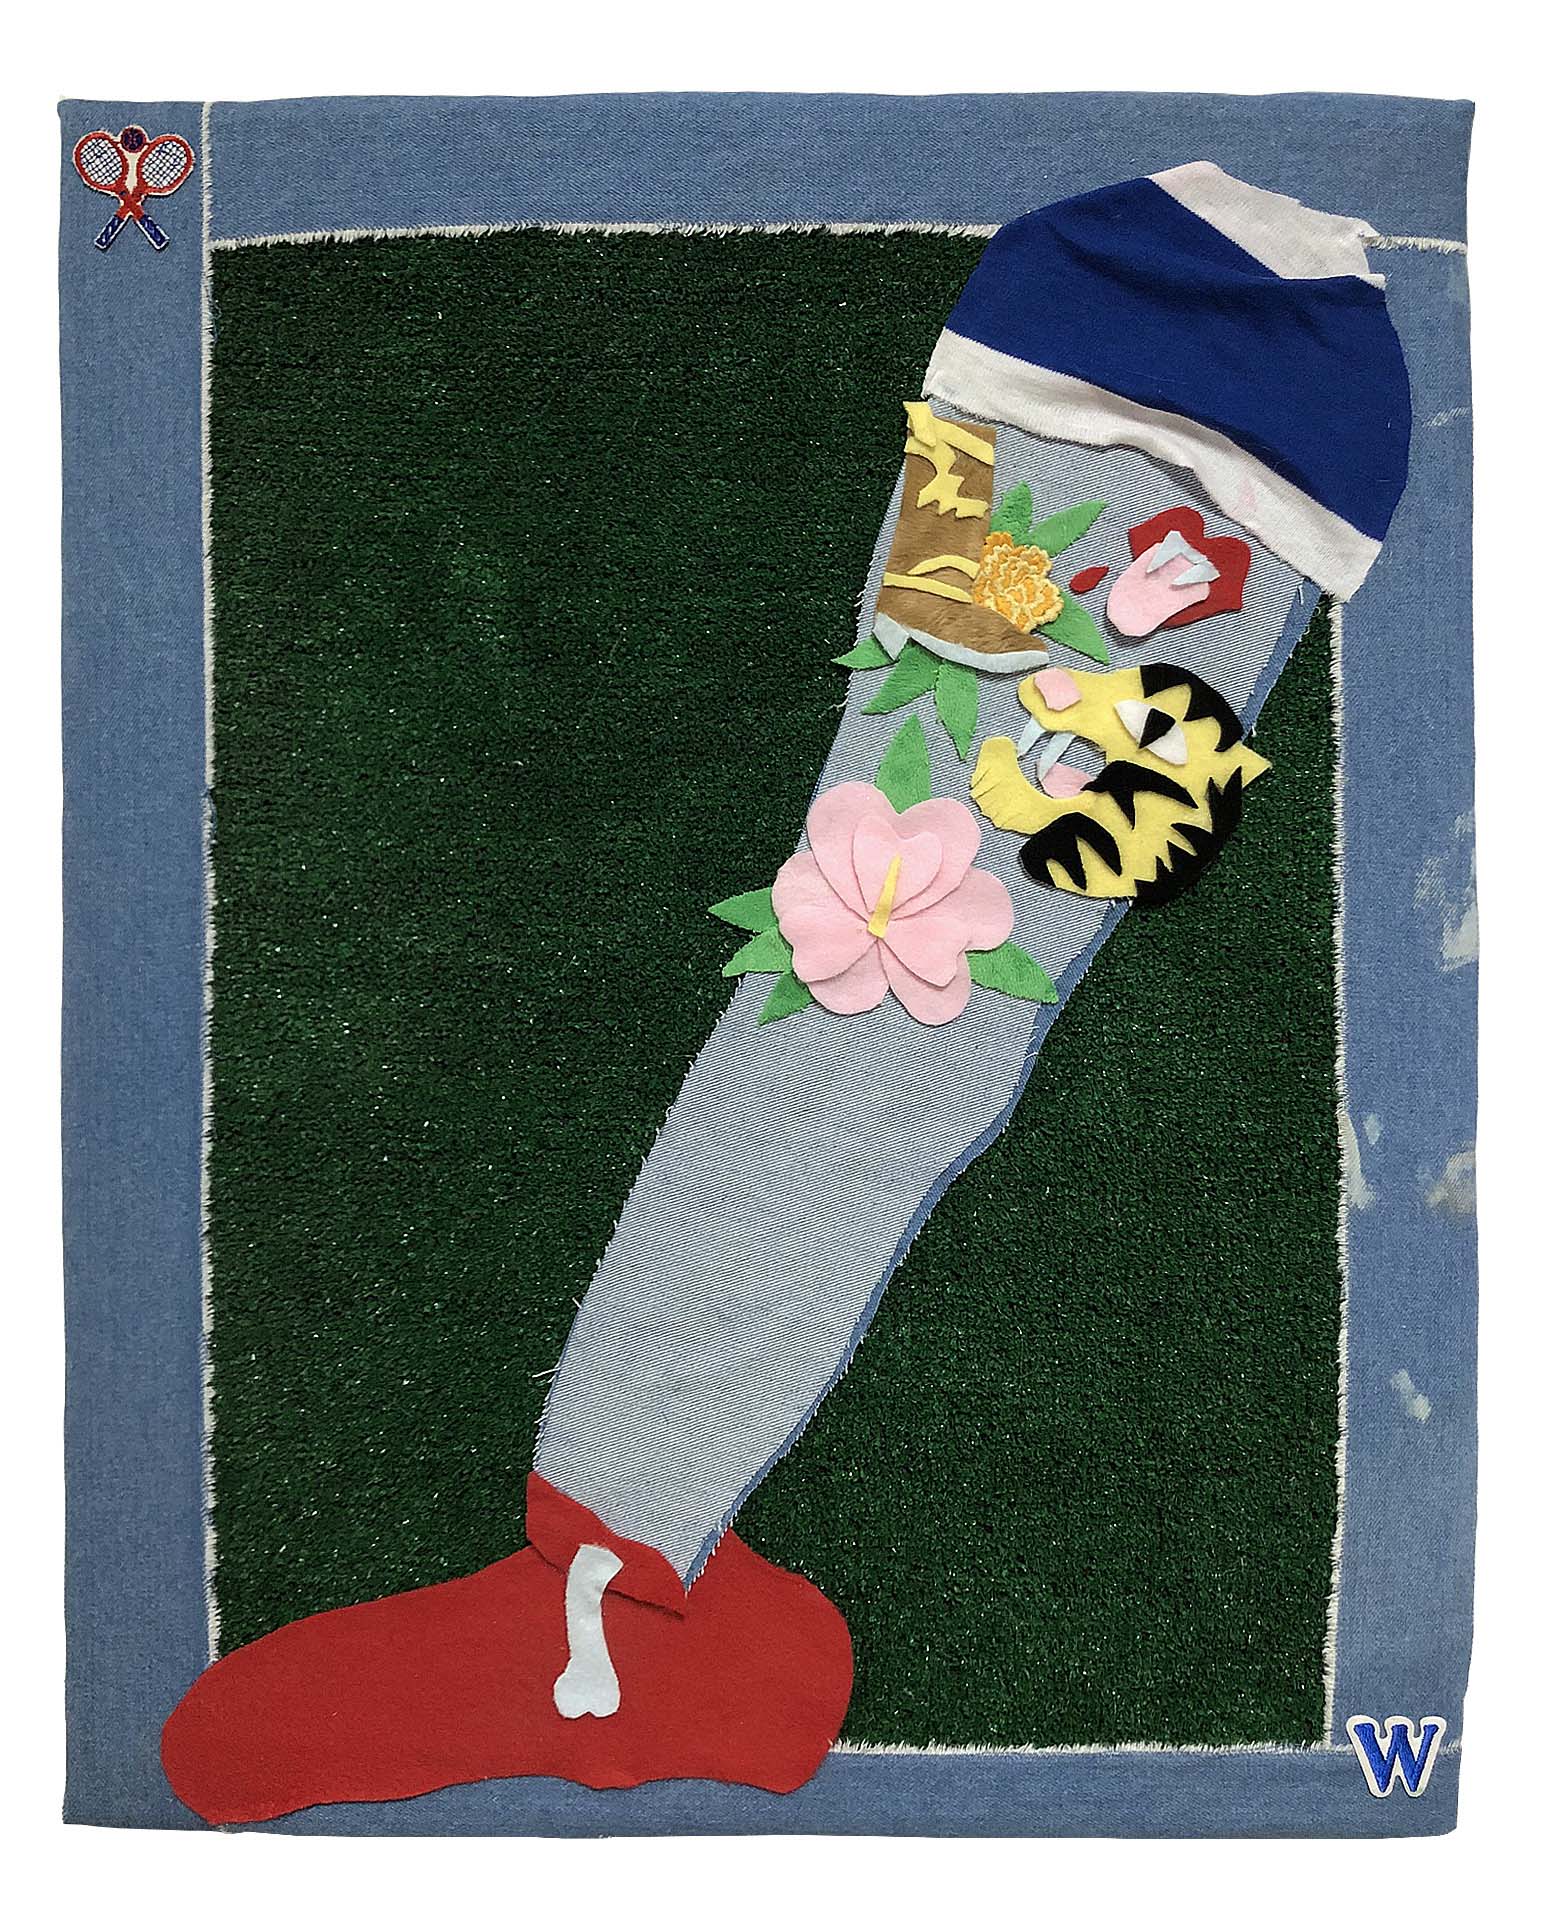 Chris Williford, Trophy (2019), Denim, fleece, jersey, faux fur, and astroturf on canvas with patches